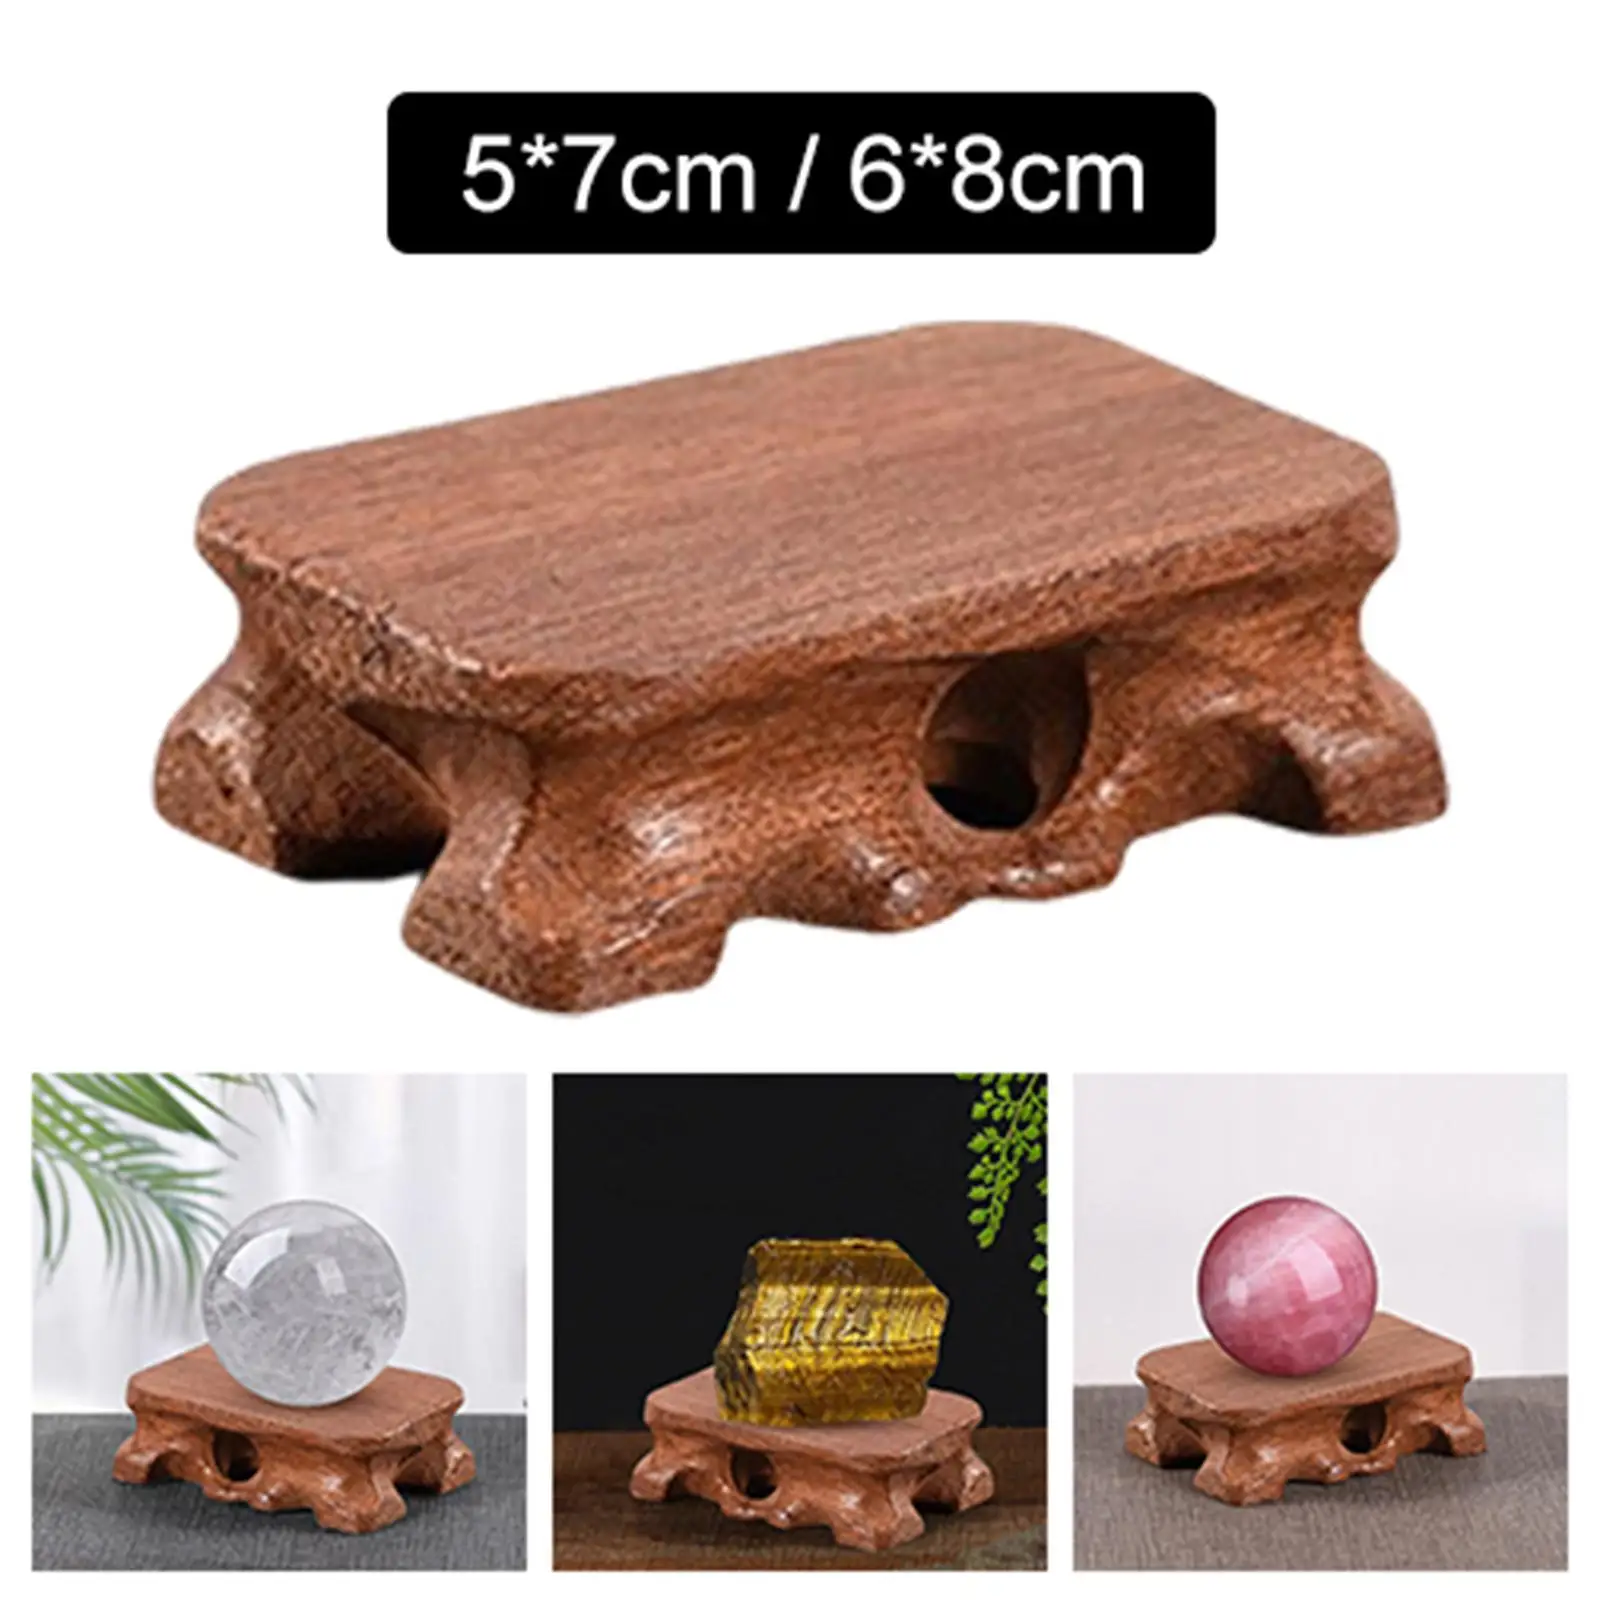 Vintage Display Stand Pedestal Sphere Holder Glass Ball Stand Holder for Fortune Telling Ball Stone Crystals Agate